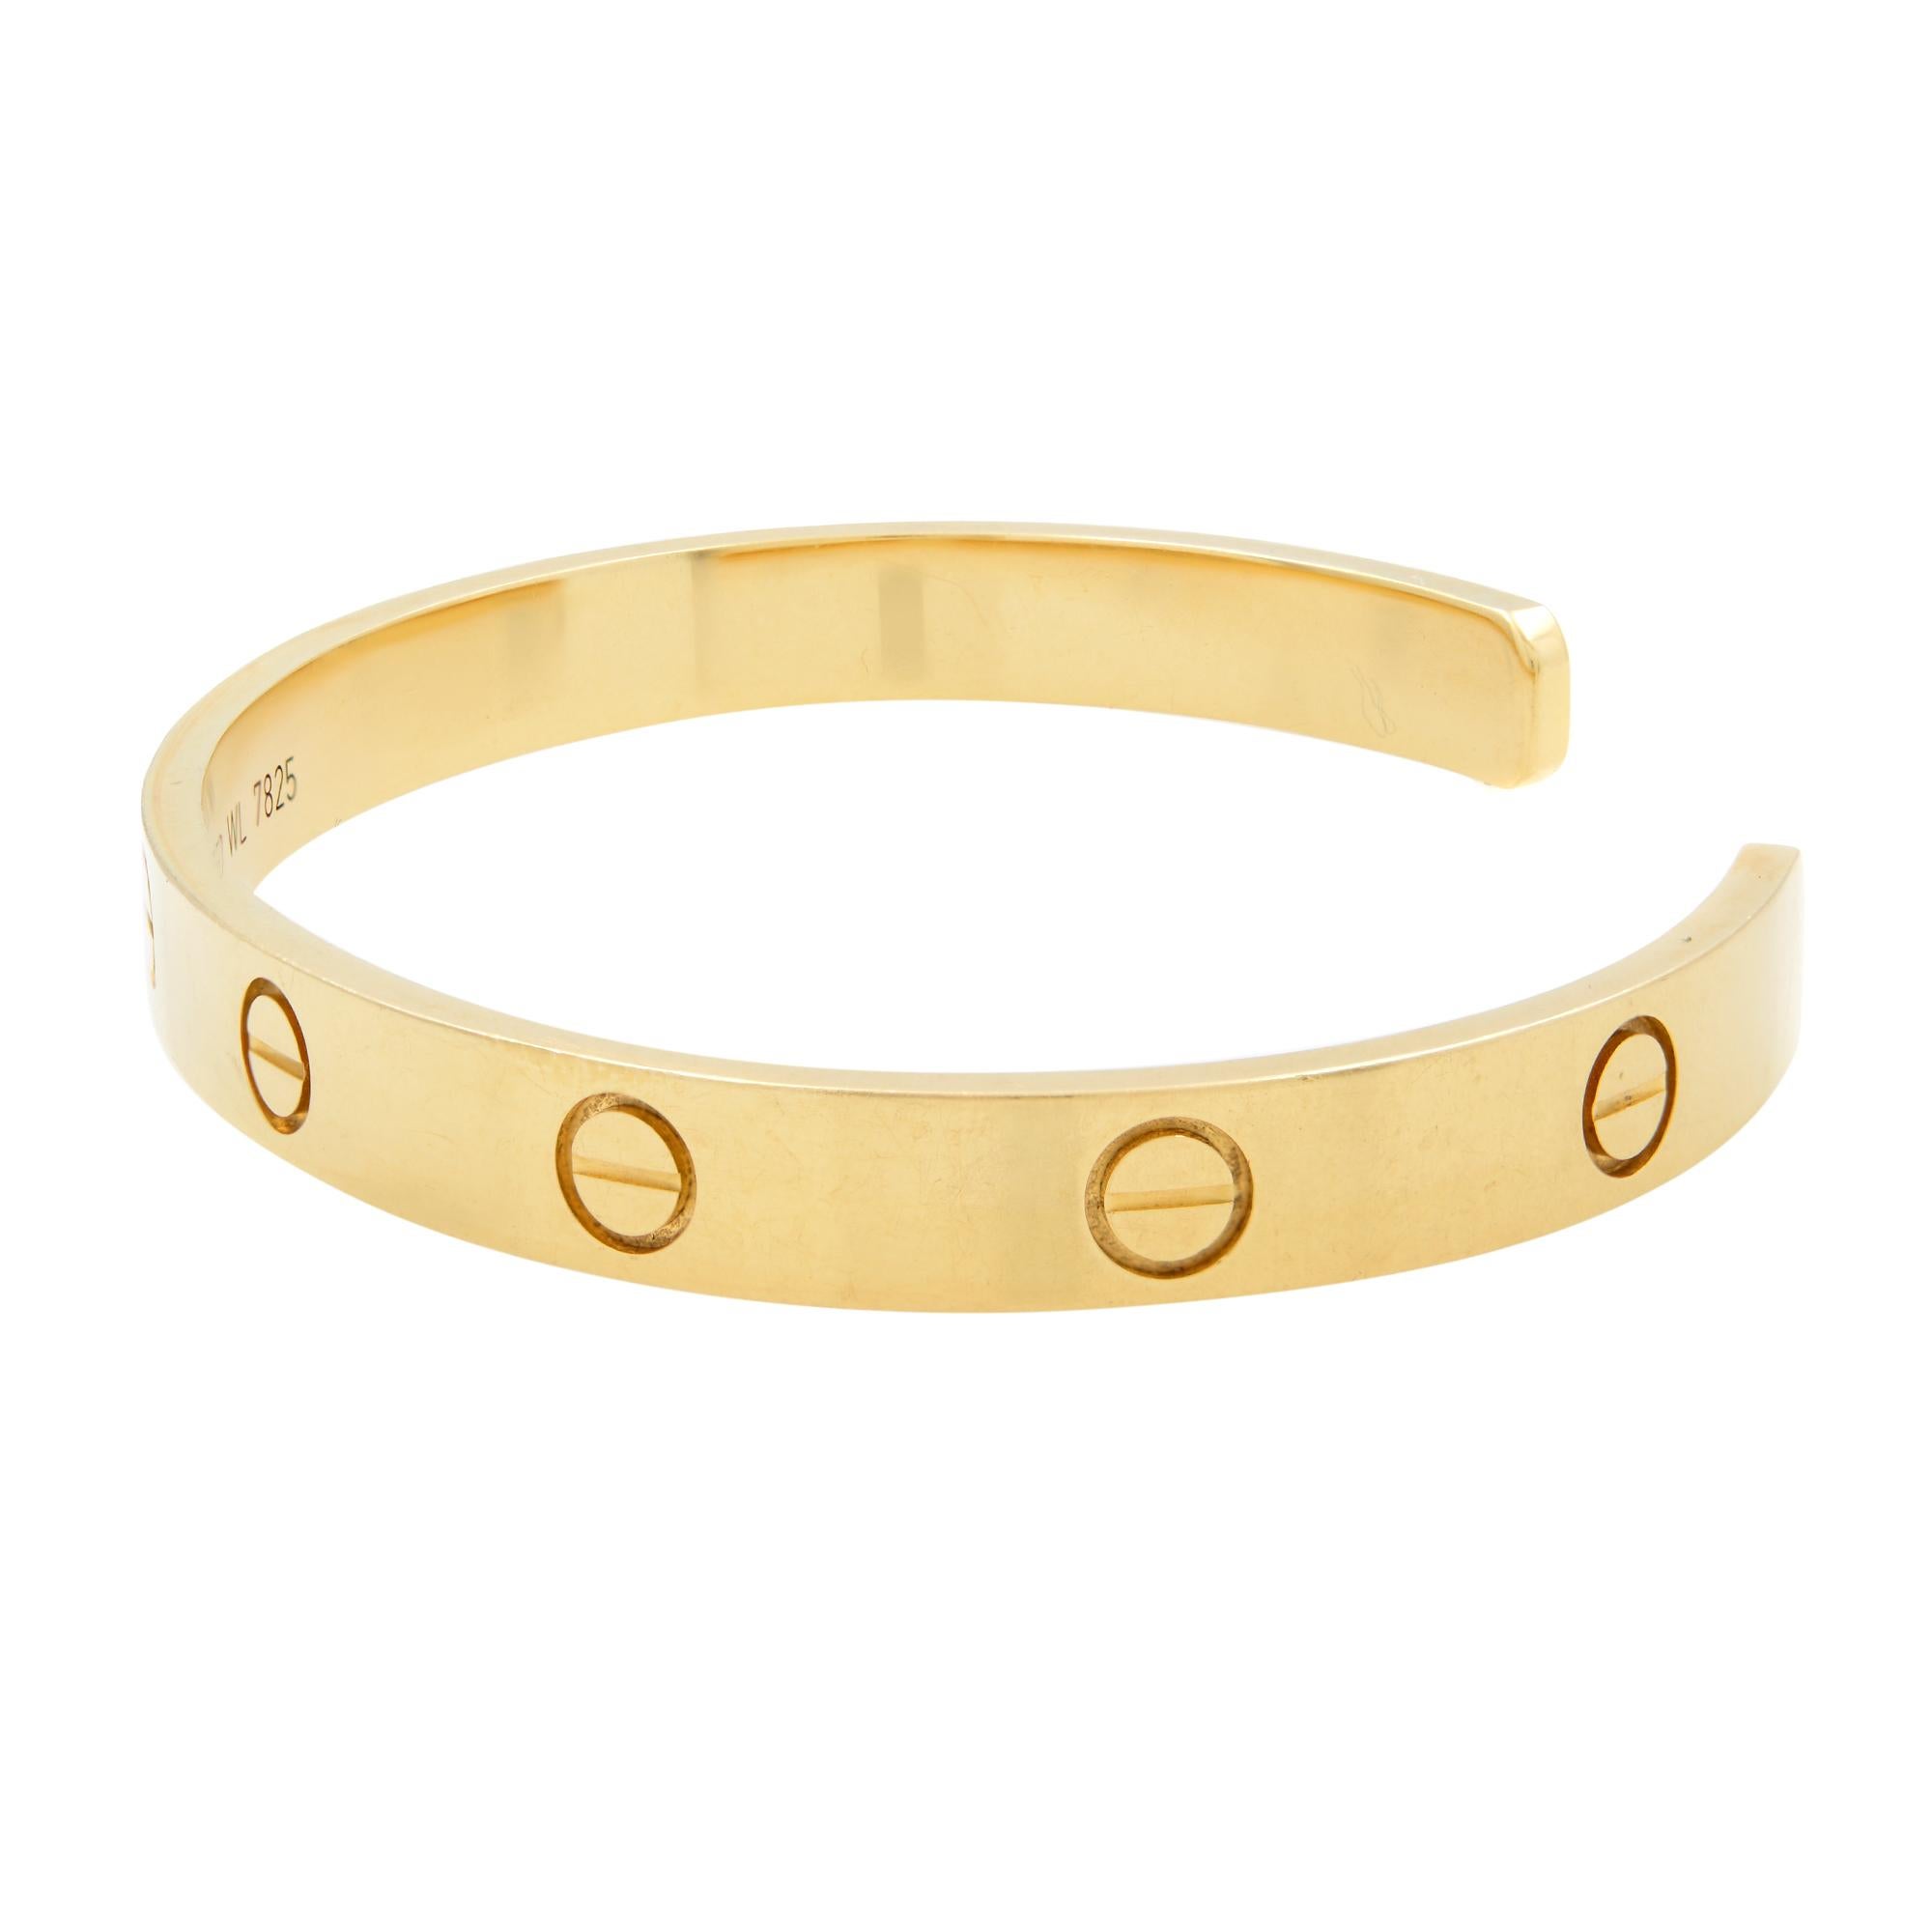 Cartier Love cuff bracelet in 18K yellow gold. Width: 6.2mm. Size 18. Great pre-owned condition. Original box and papers are not included. Comes with a Cartier pouch.